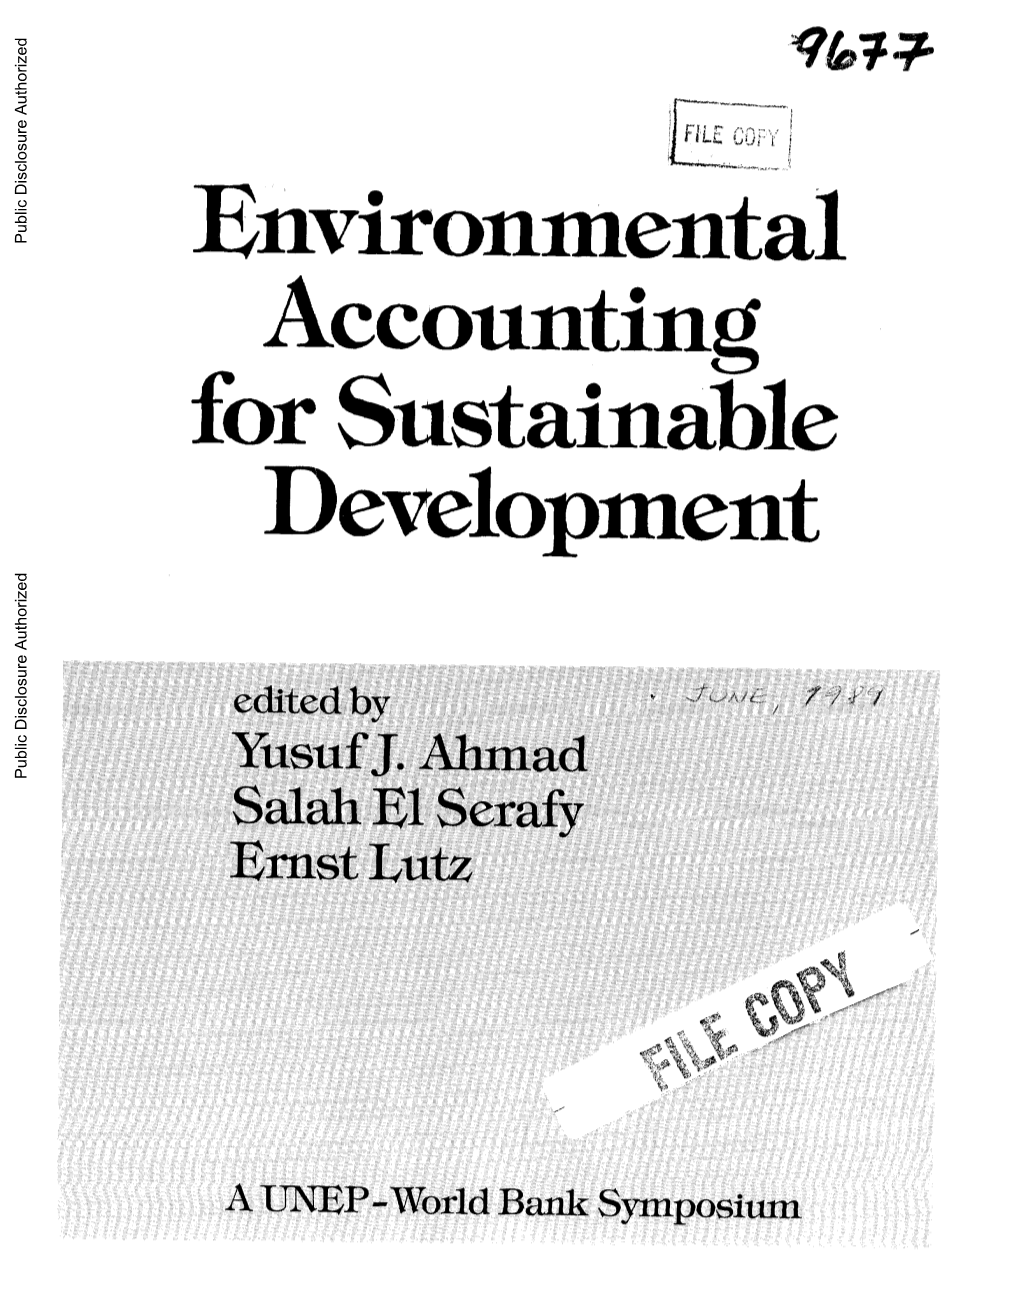 Environmental Accounting for Sustainable Development 1989